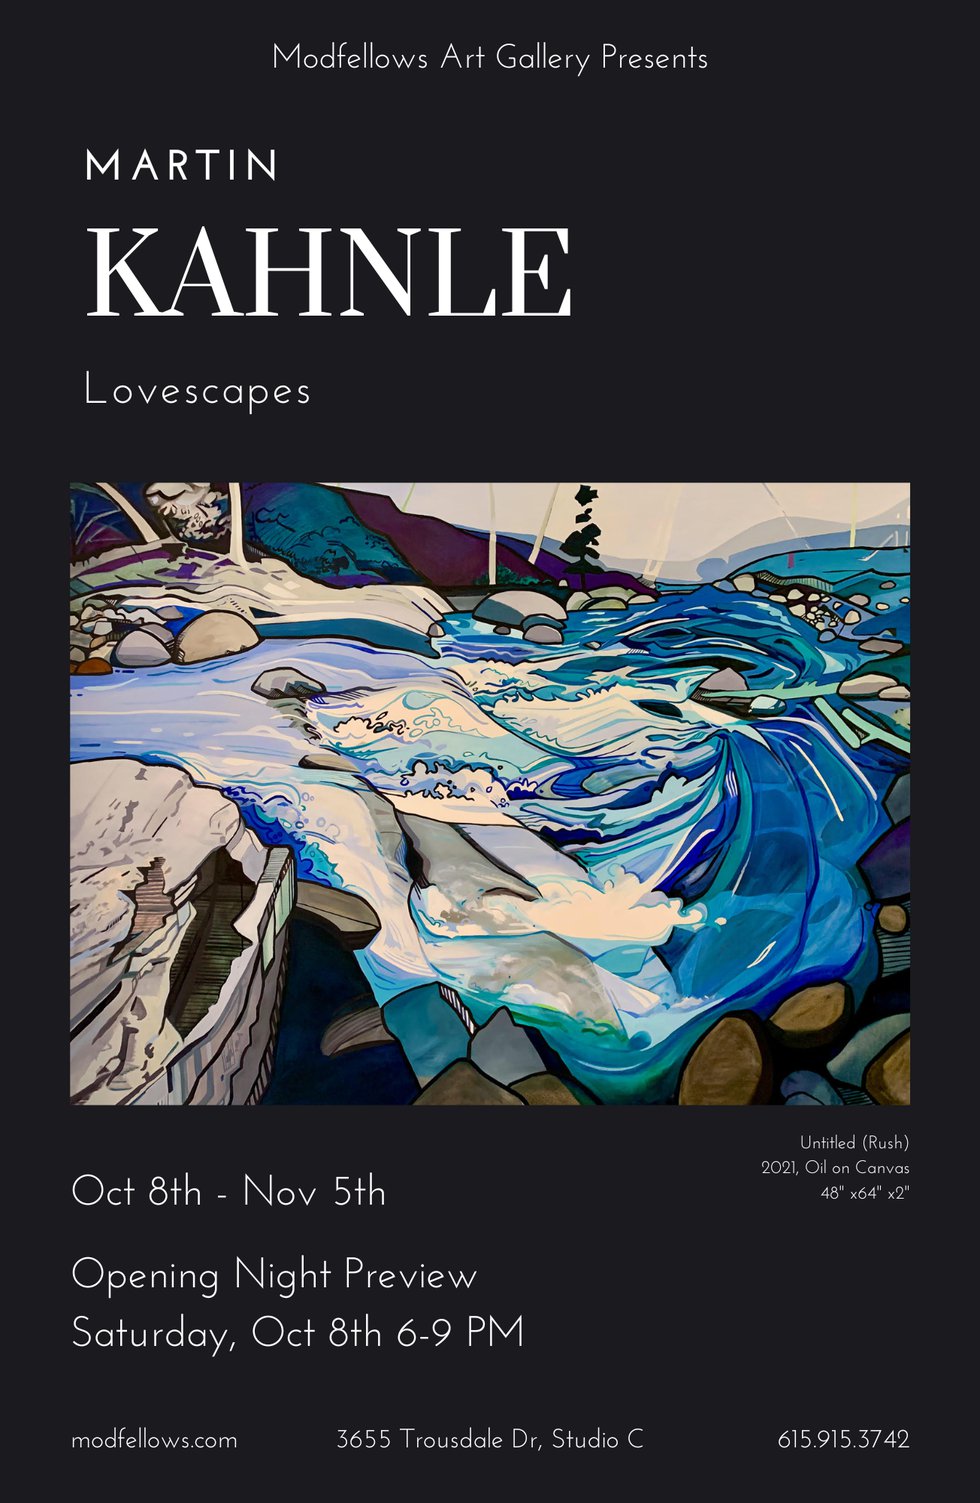 Inspired by the landscape paintings of David Hockney, Alex Katz, and Lawren Harris, Kahnle transports the viewer to boldly rendered forests and brooks. With thematic intentions, these works are meant to reflect upon .png